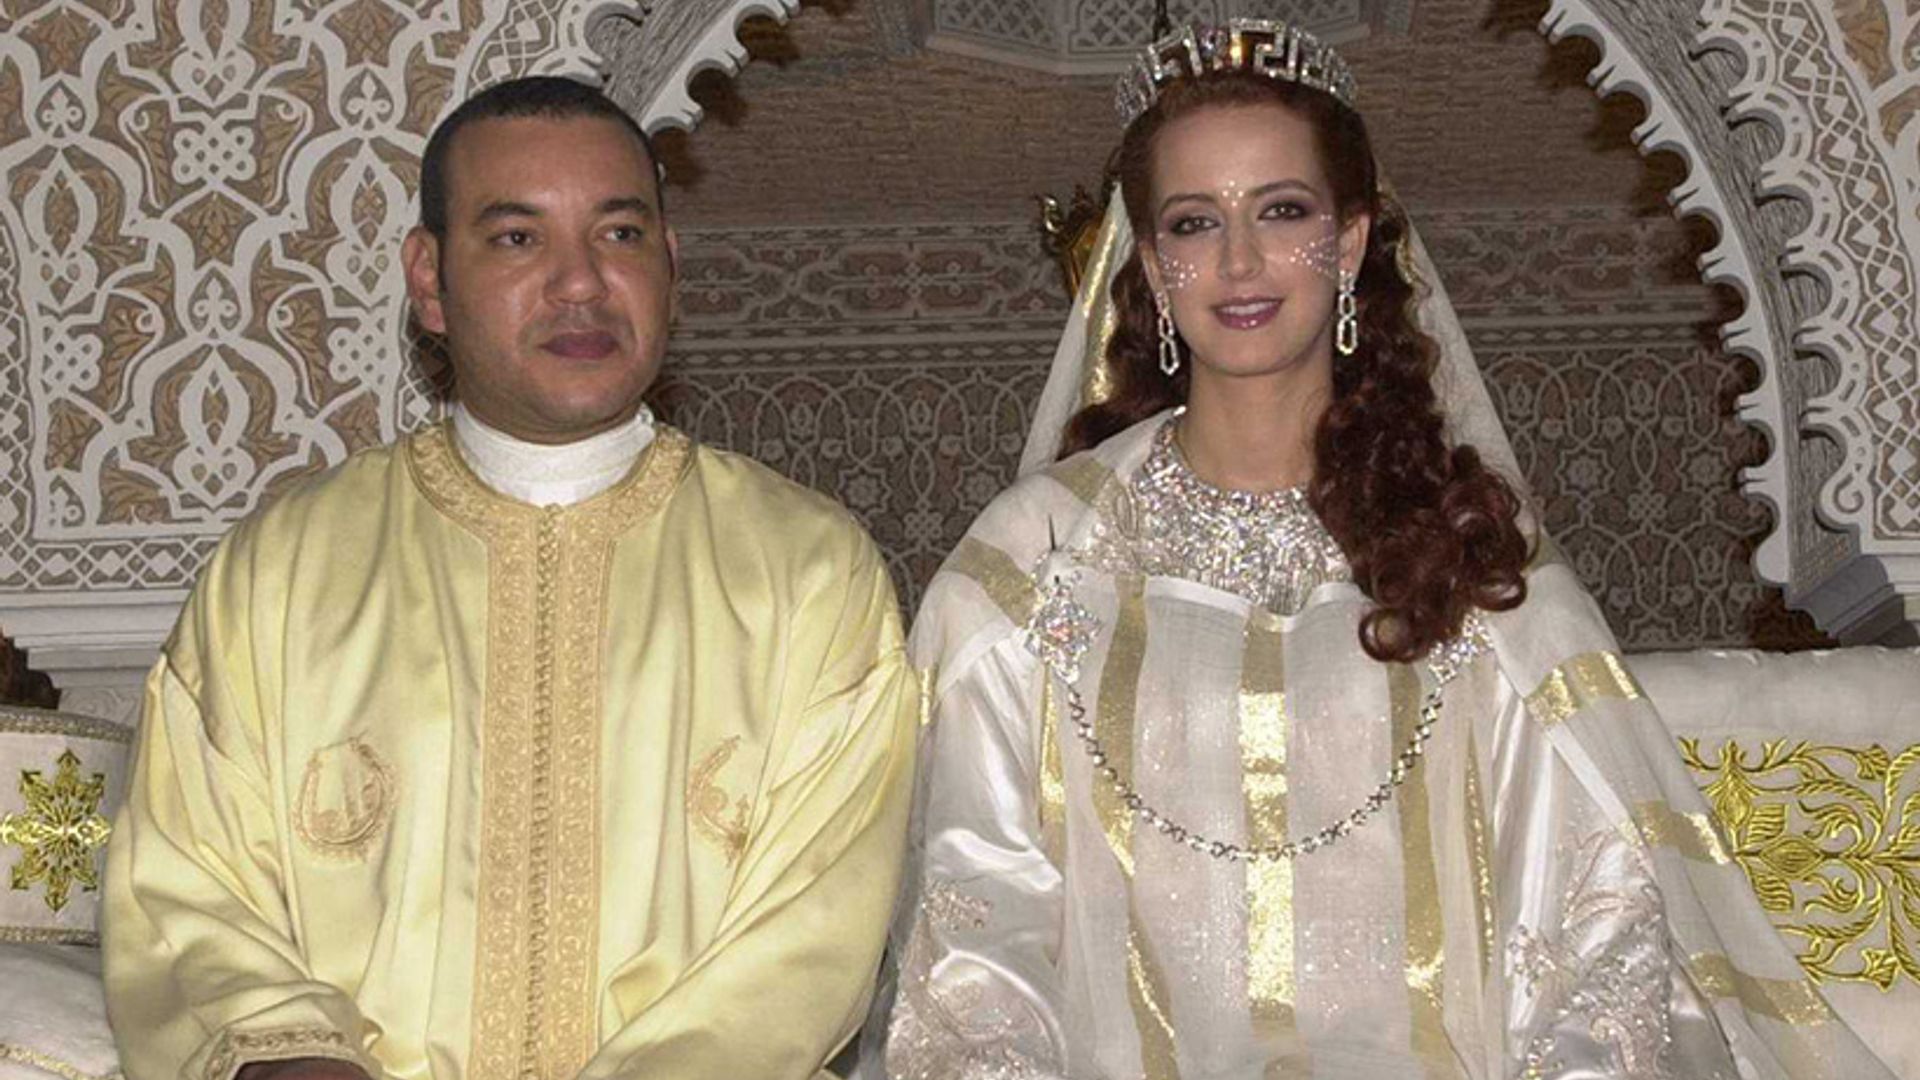 King Mohammed VI of Morocco and wife Princess Lalla Salma divorce